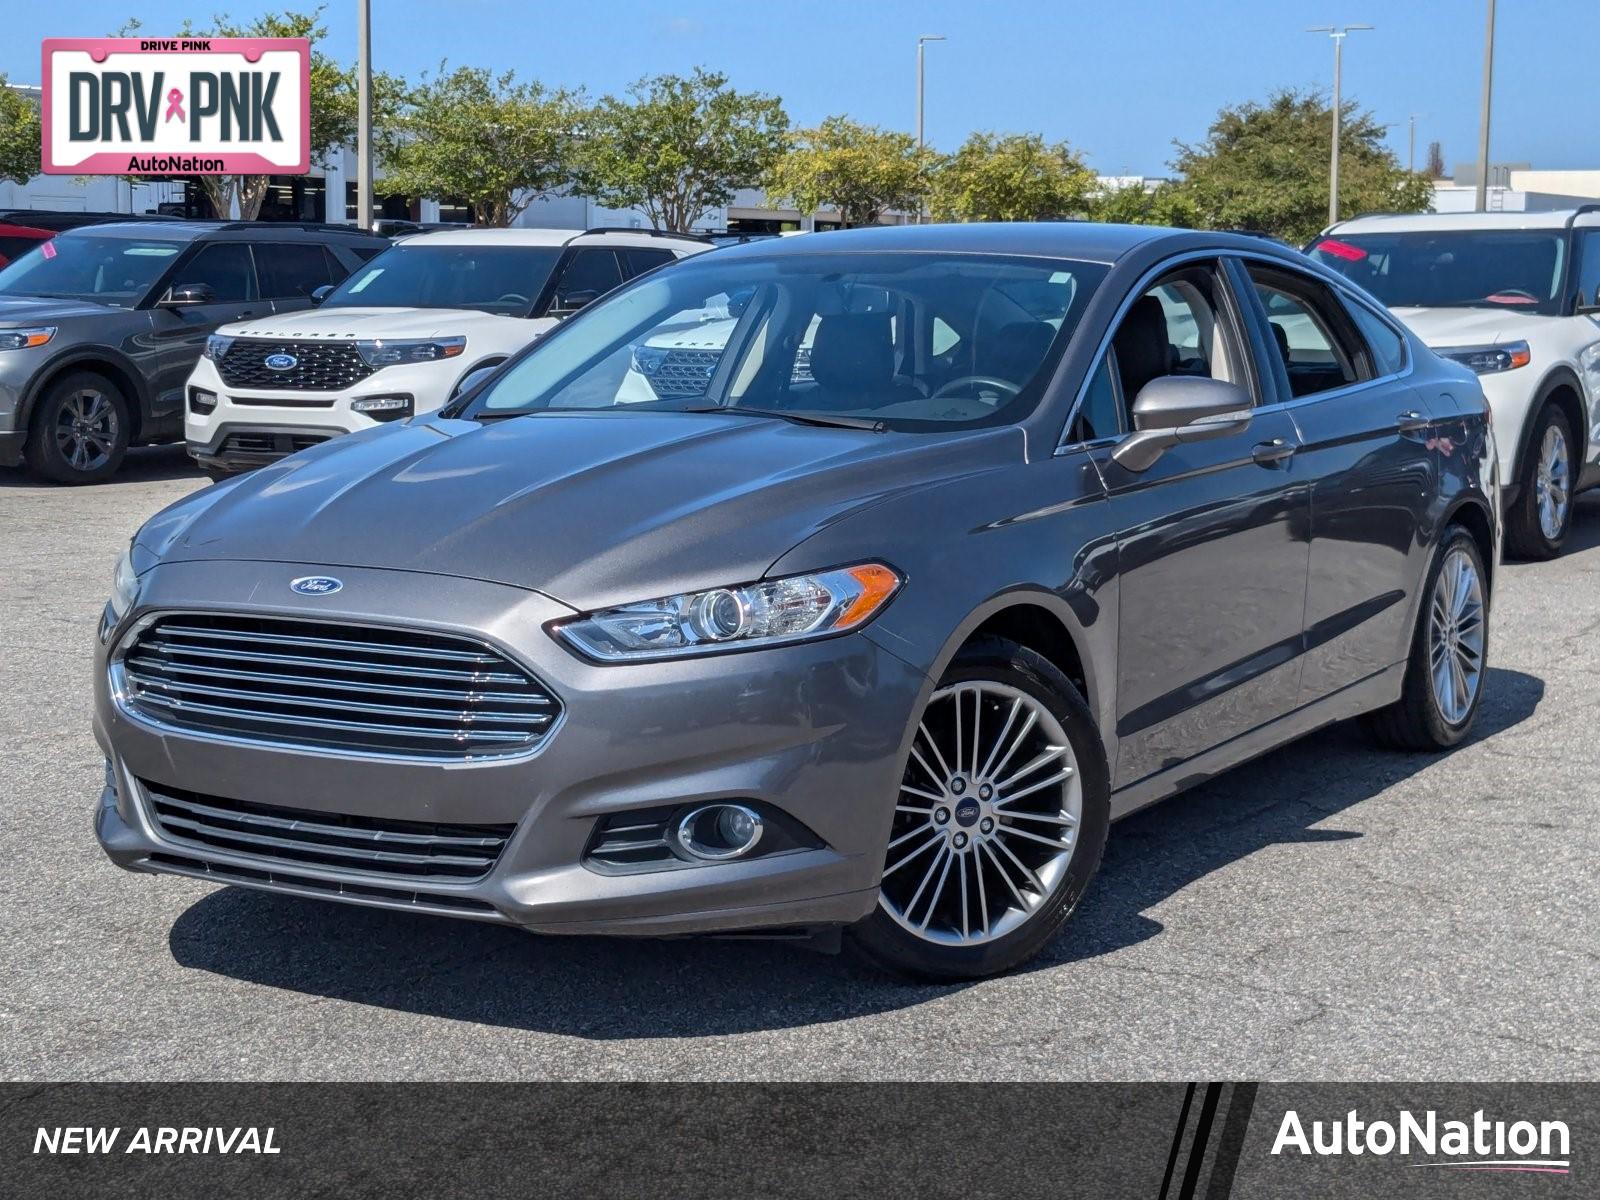 2013 Ford Fusion Vehicle Photo in St. Petersburg, FL 33713